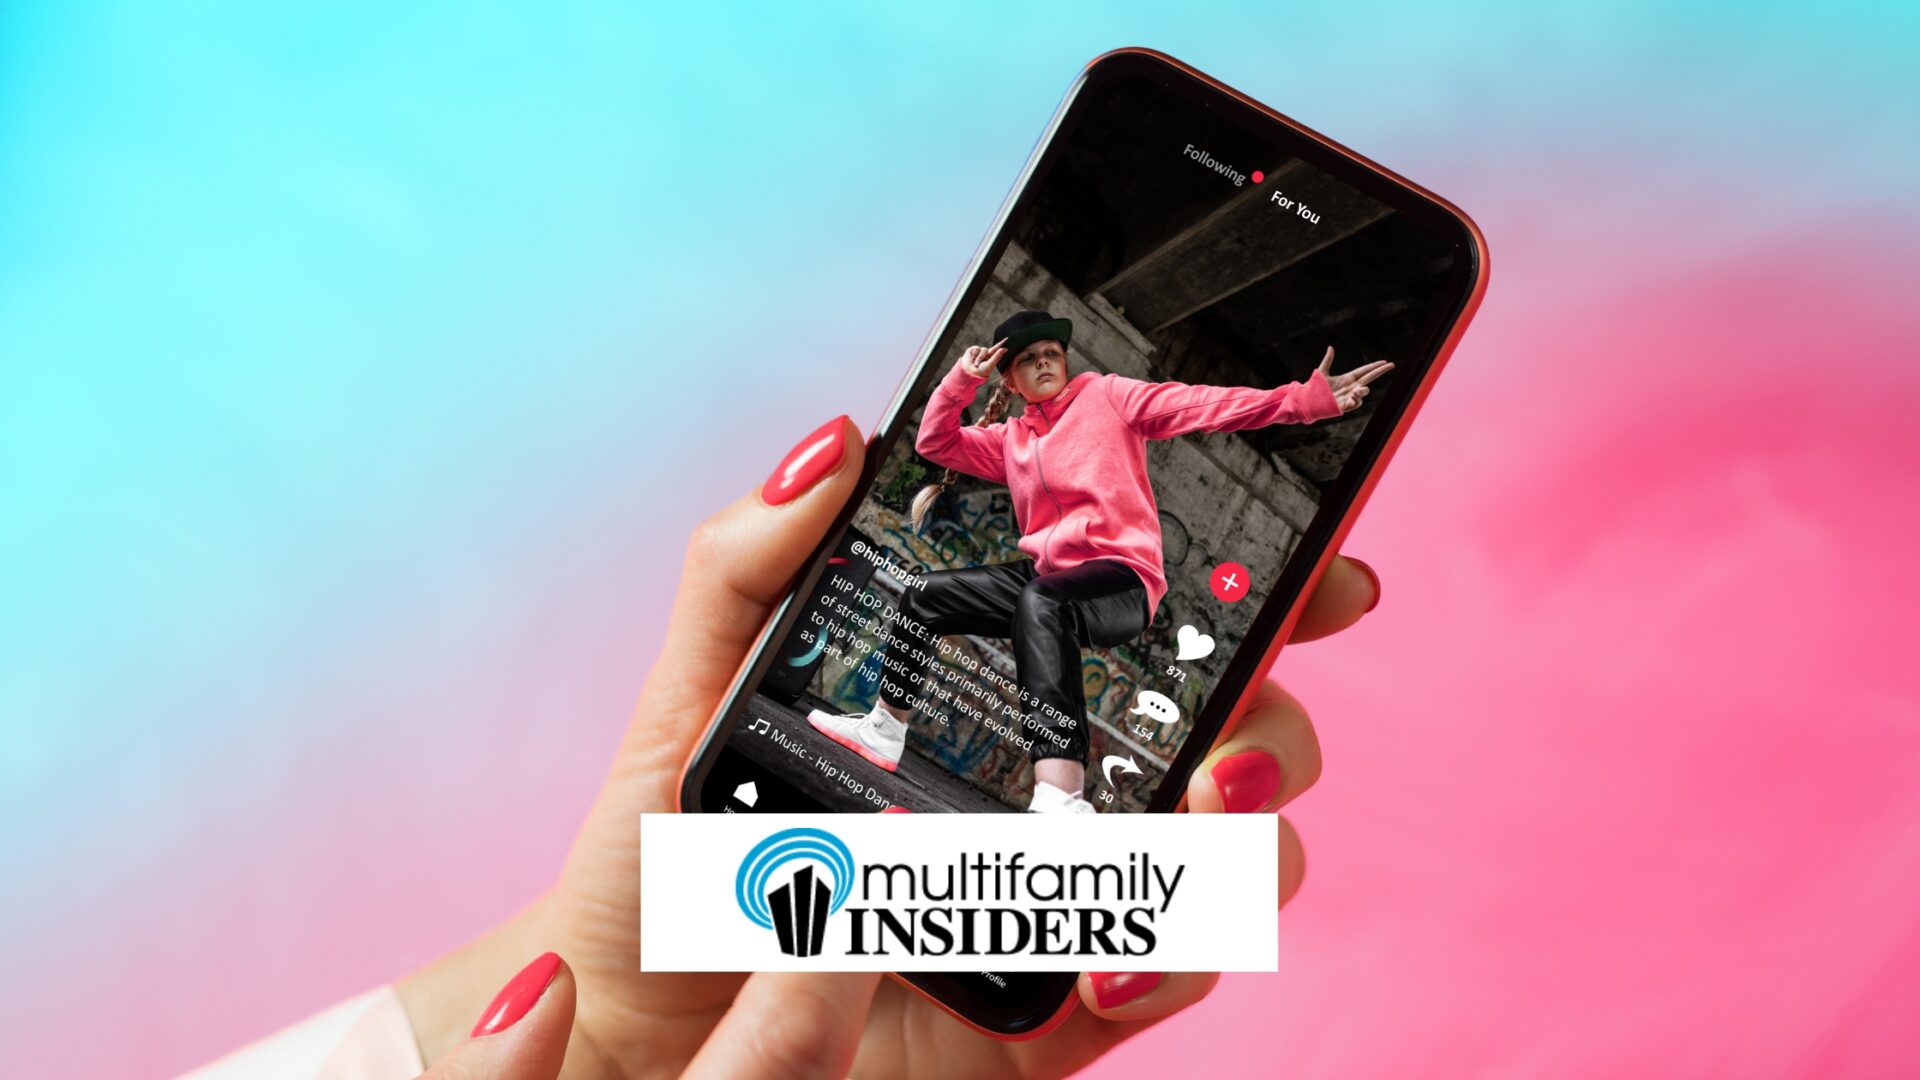 Multifamily Insiders: Short-Form Video Turns Prospects Into Residents